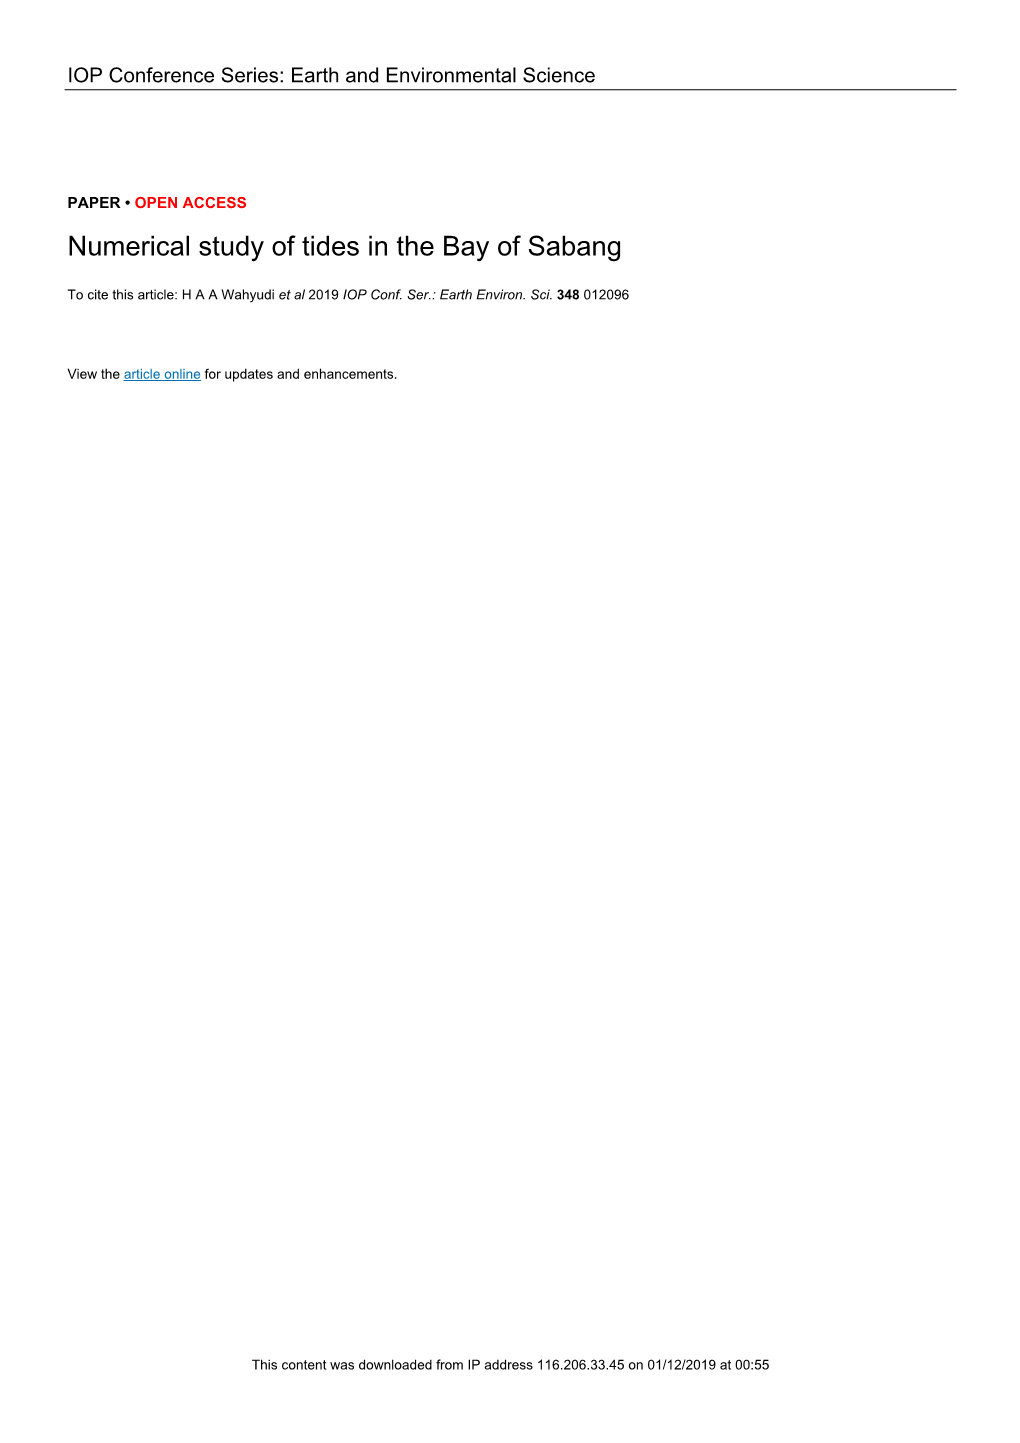 Numerical Study of Tides in the Bay of Sabang